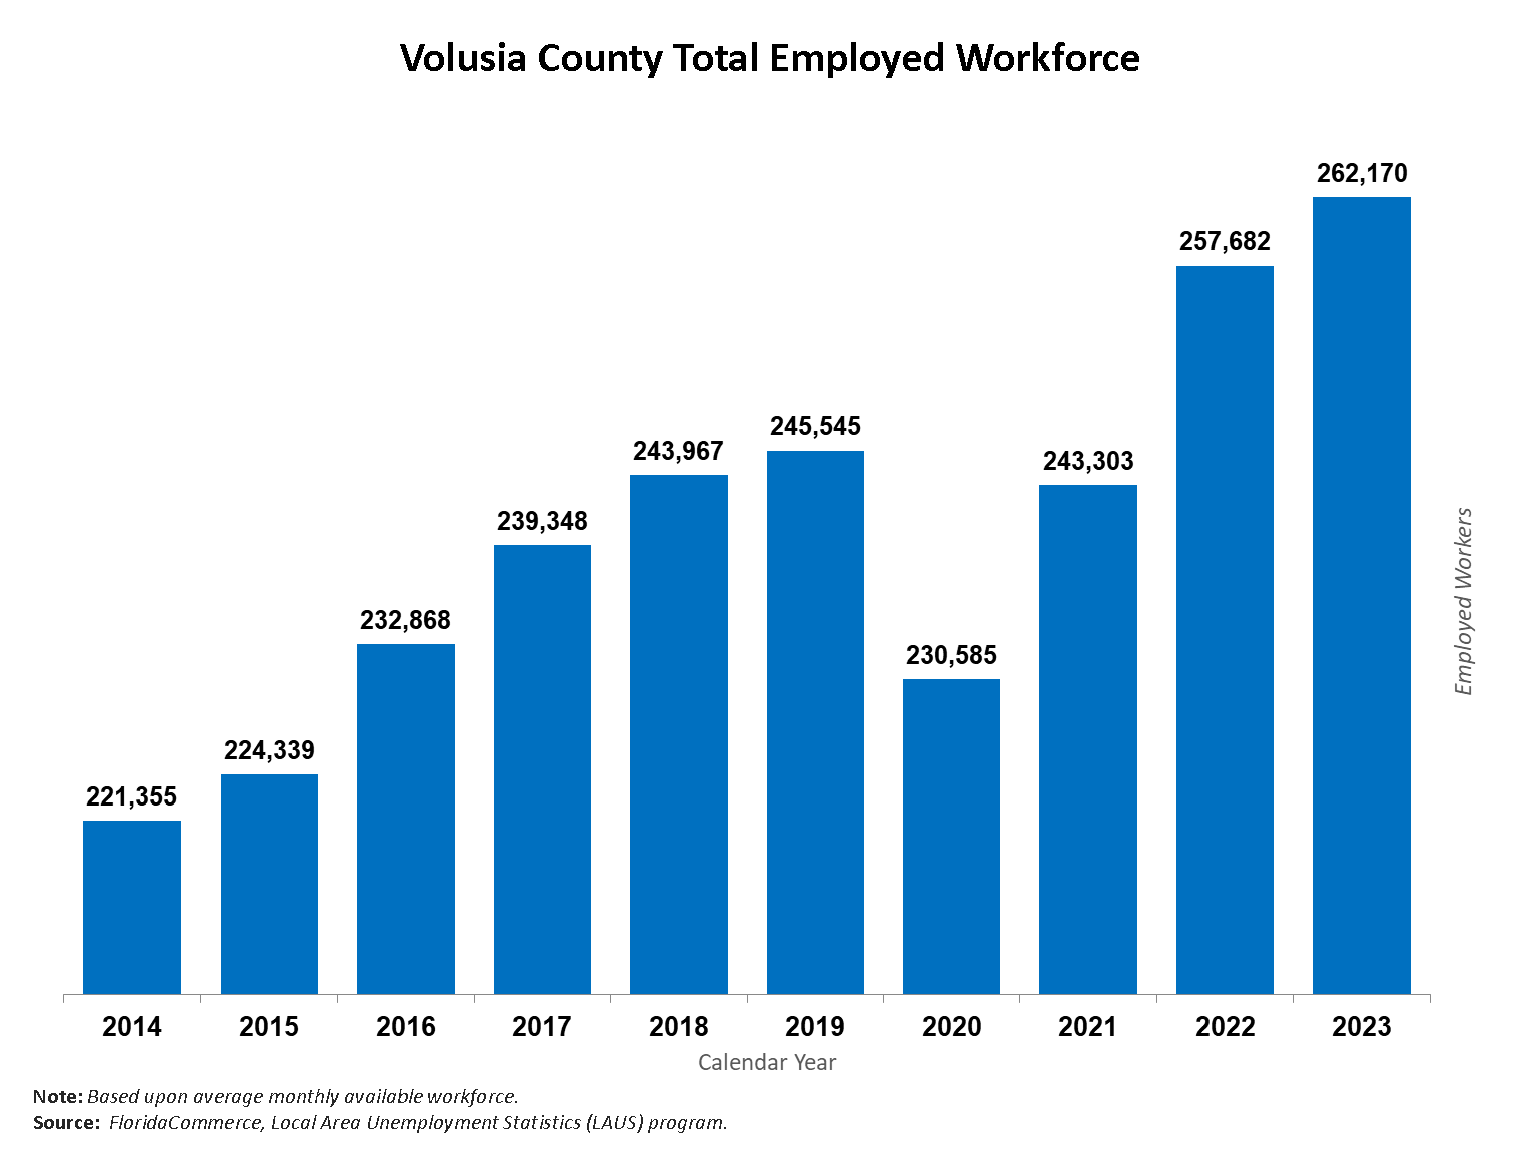 Volusia County's annual average employment increased more than 29,000 from 2013 to 2019. In 2013, there were 216,323 people employed in the county and that number had grown to 245,545 in 2019. Due to the onset of the COVID-19 pandemic shutdowns, average employment in 2020 decreased 6% to 230,585. Employment rebounded to 243,303 in 2021, increasing in 2022 to 257,682 and has since grown 1.7% to 262,170 in 2023.